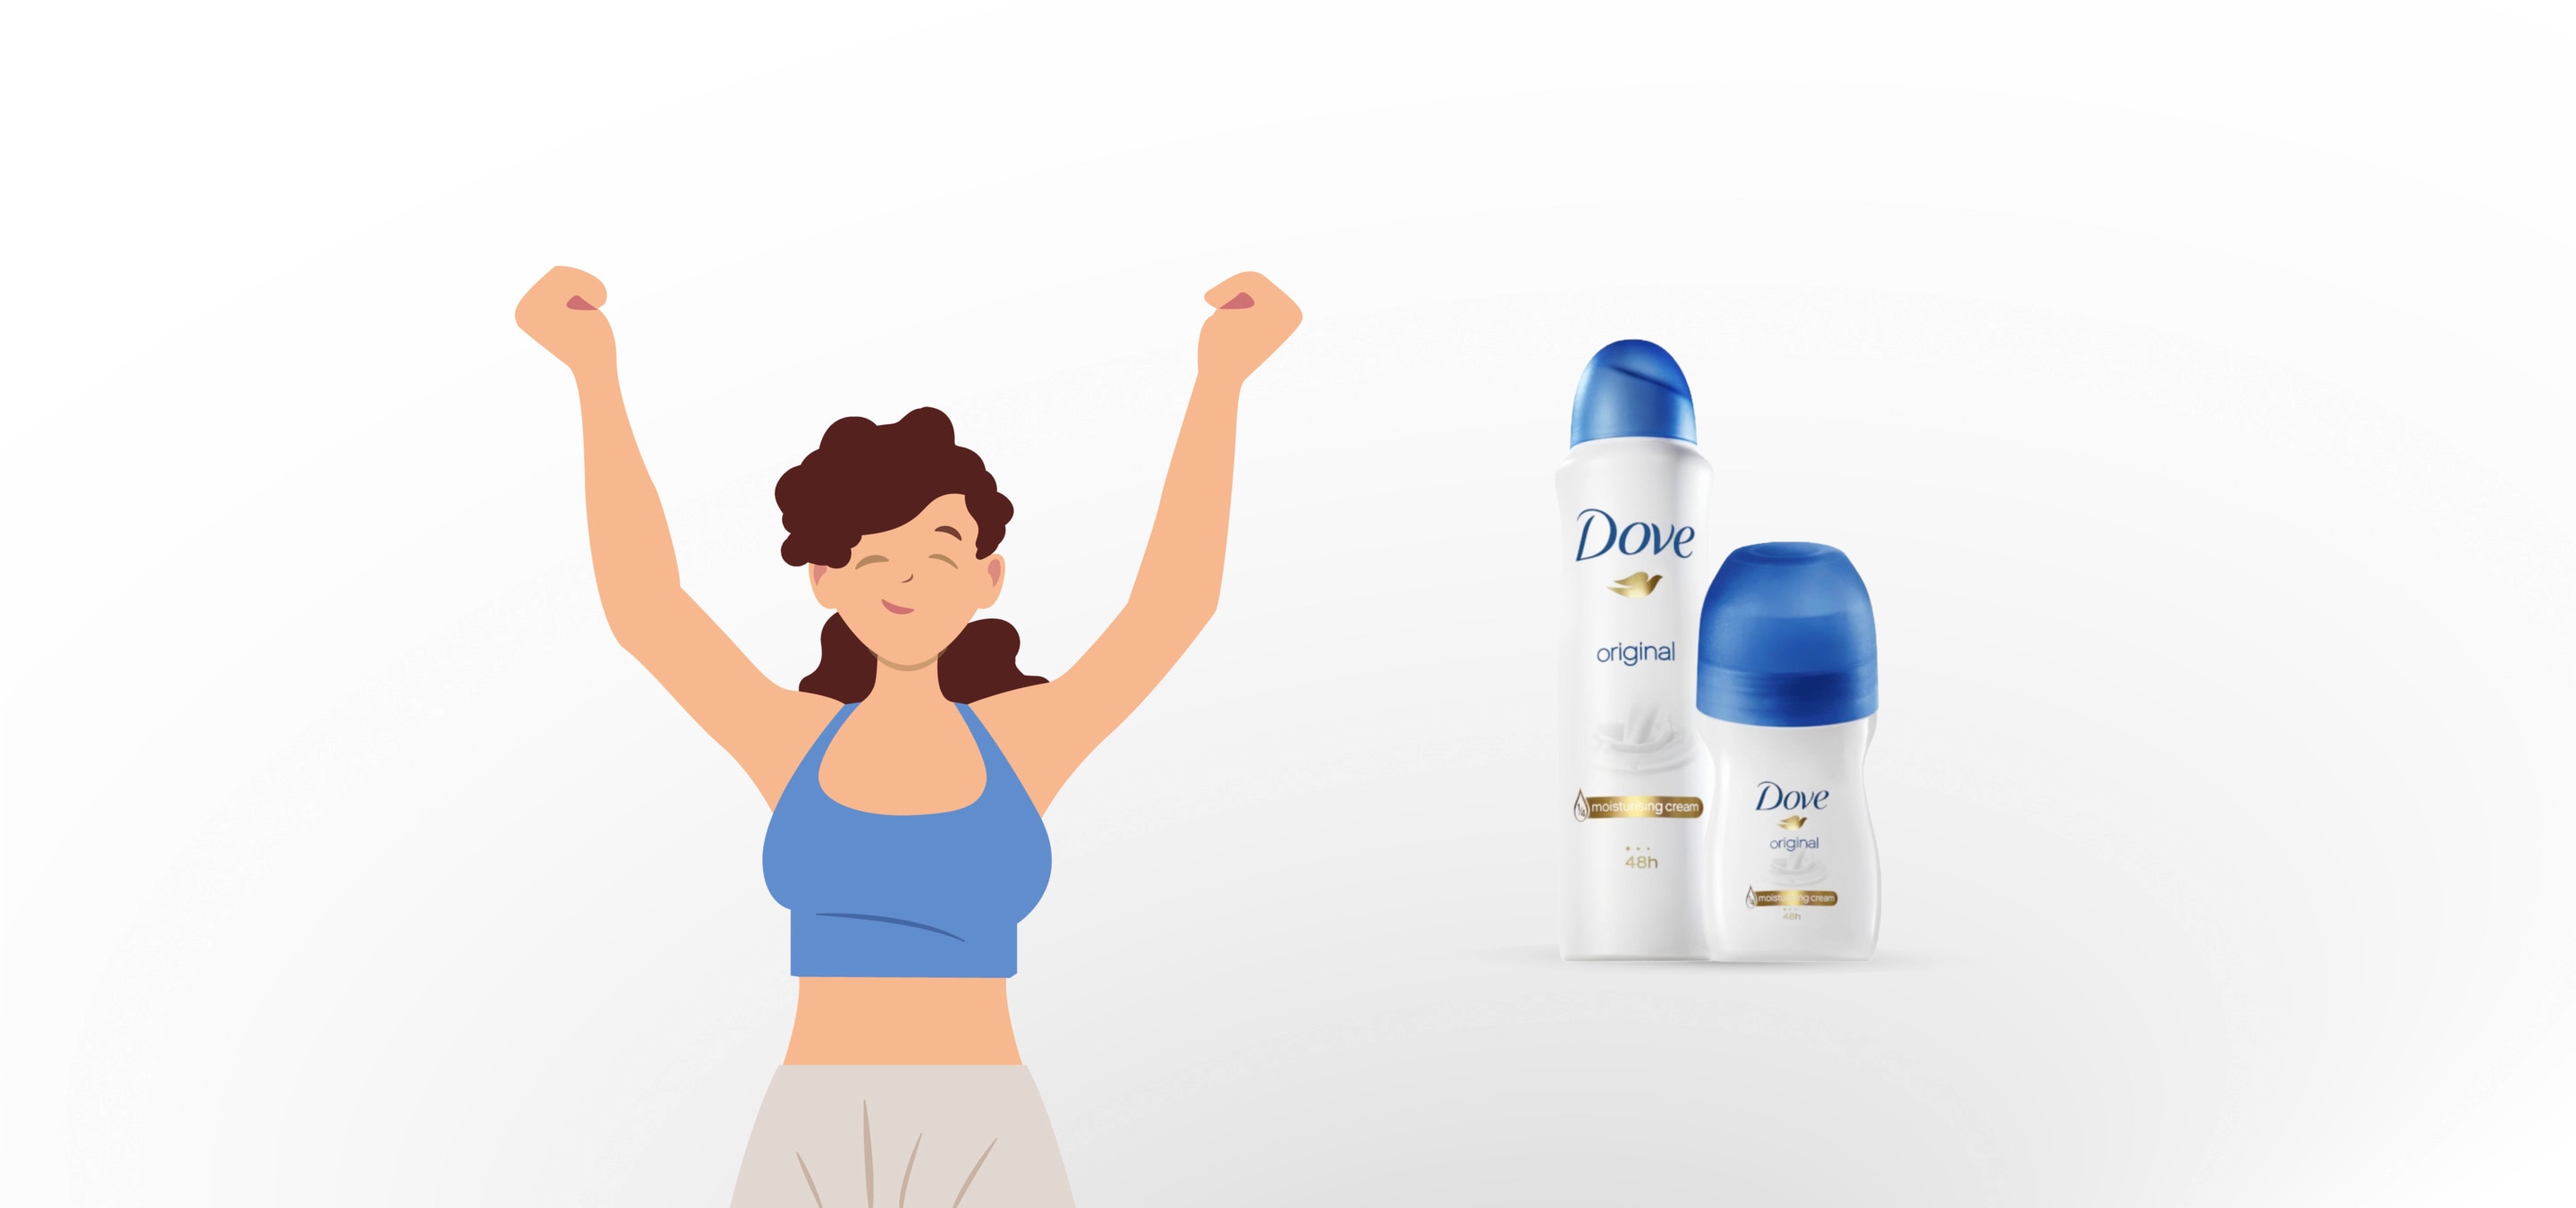 Switching to Dove Deo is a winning move!